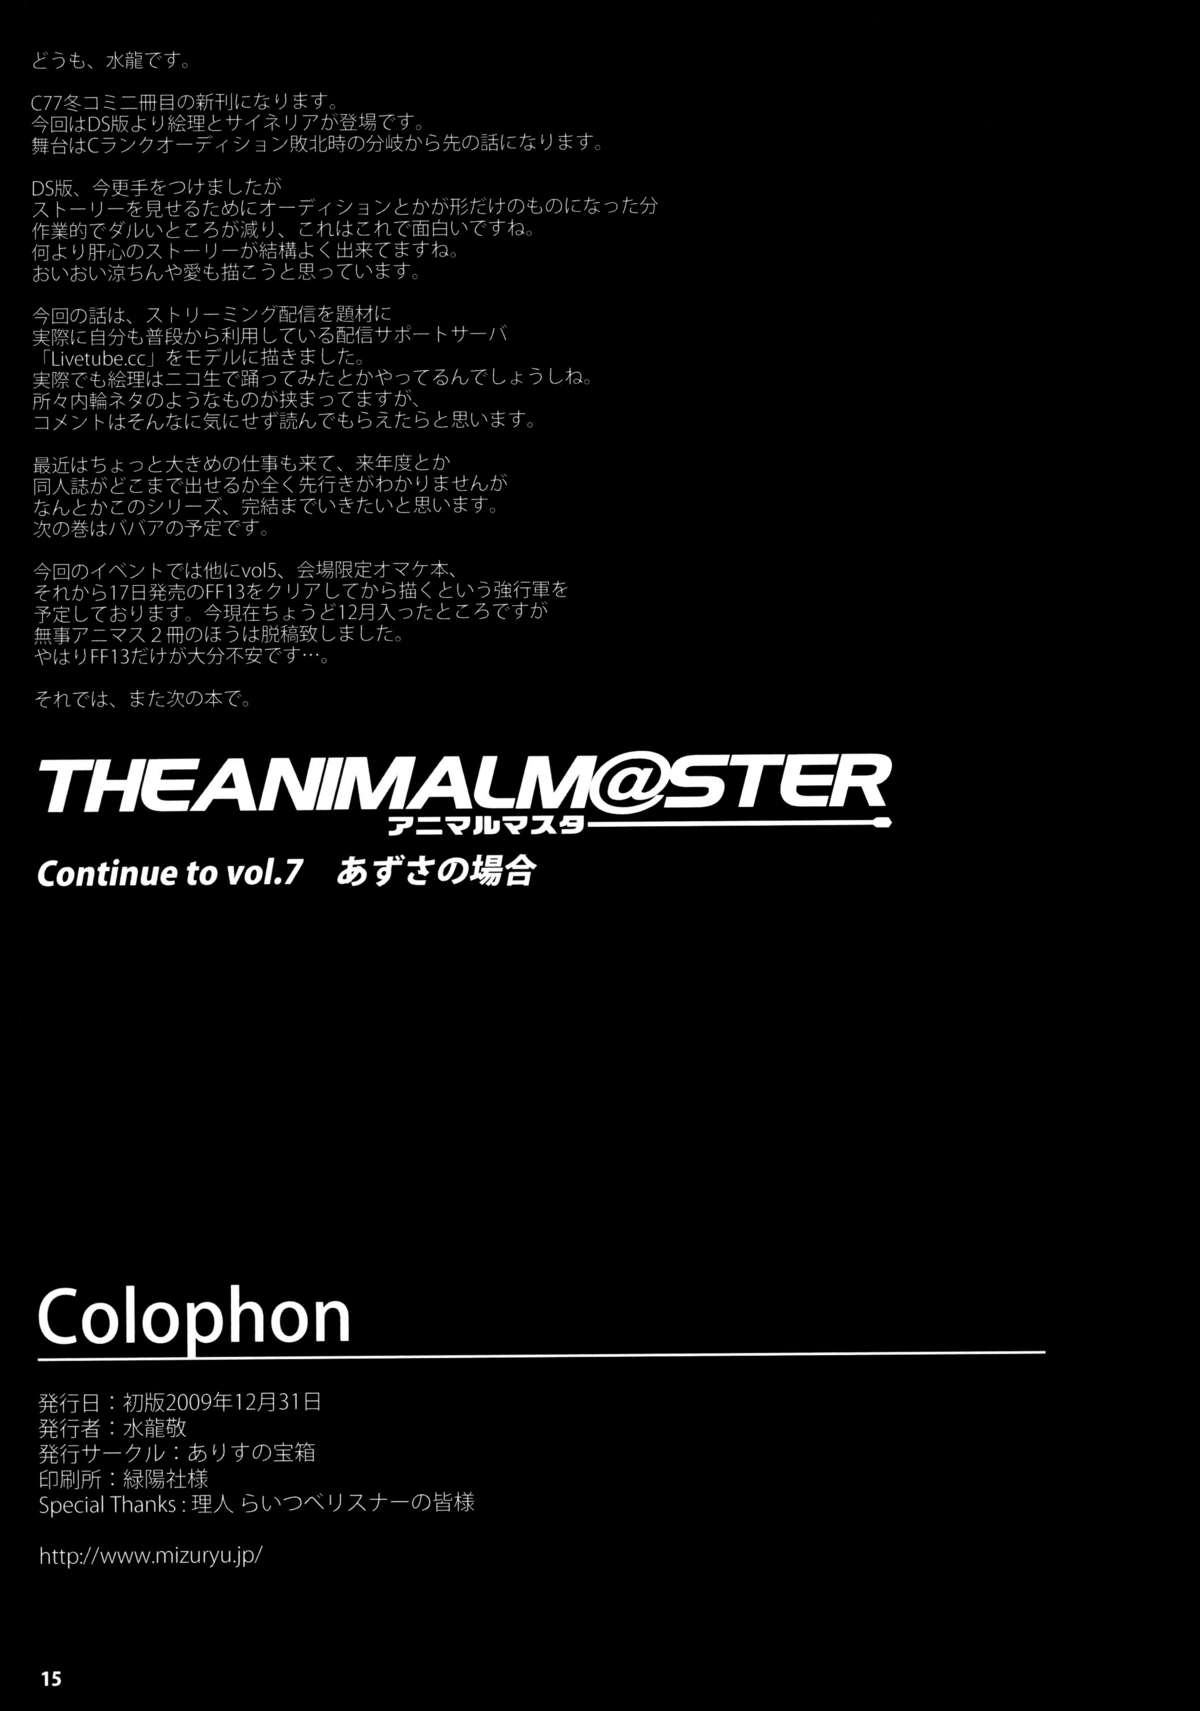 （C76）[アリスのタカラバコ（水龍敬）] The AnimalM @ ster（THE iDOLM @ STER）[Eng] [コンプリート]